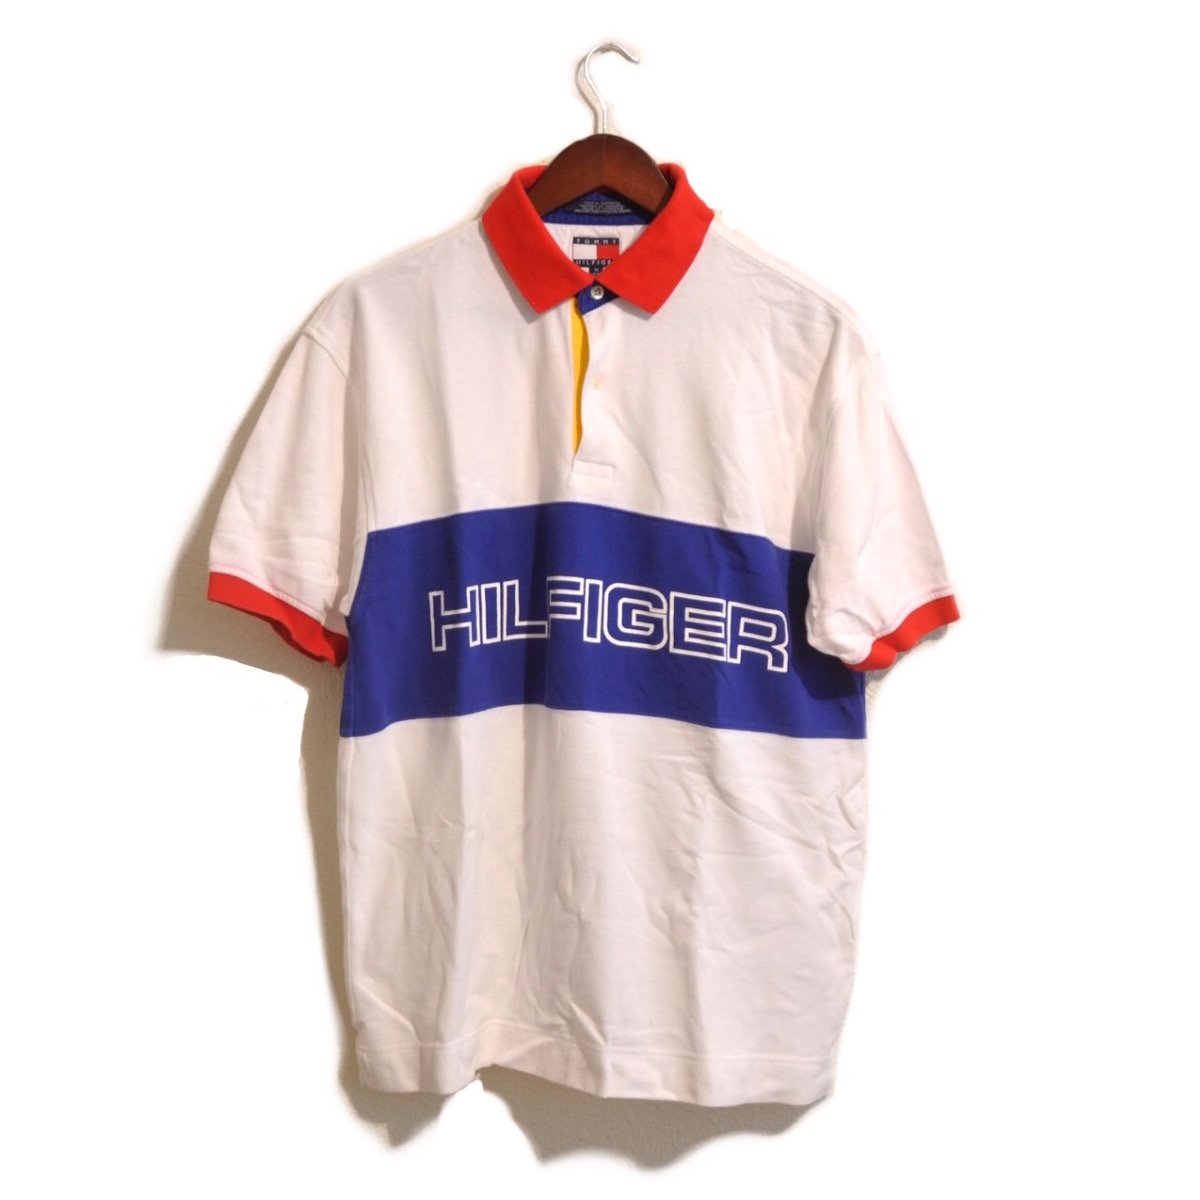 The Rewinds — Tommy Hilfiger vintage polo shirt